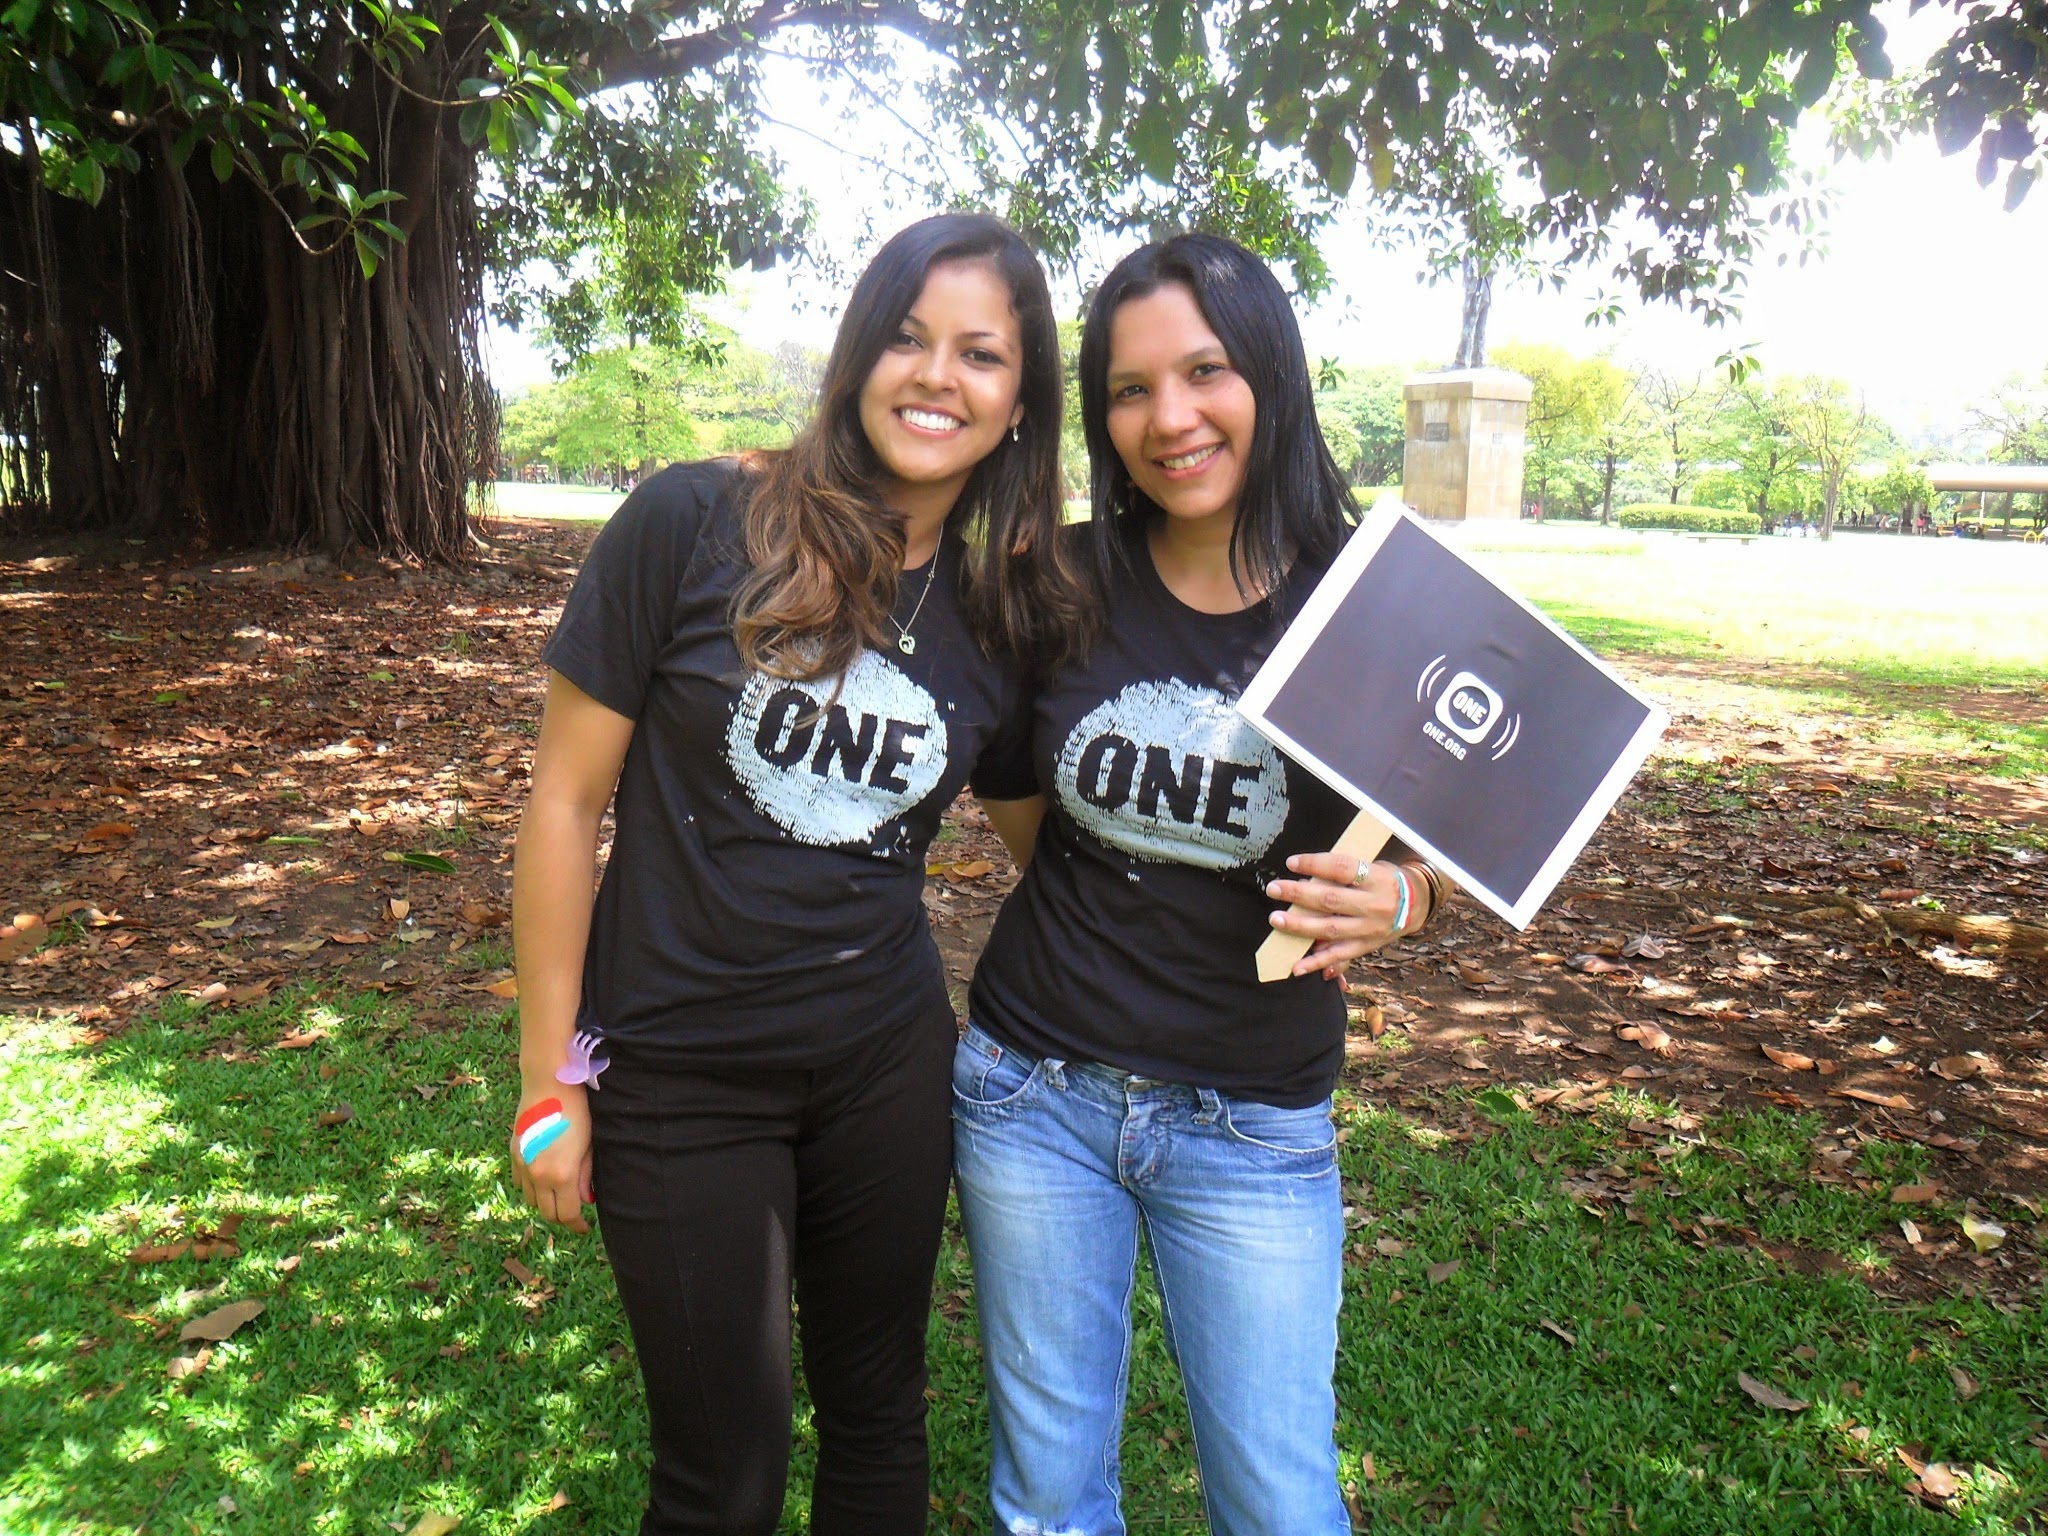 Brazil ONE members: “We want to win the World Cup AND the fight against extreme poverty”